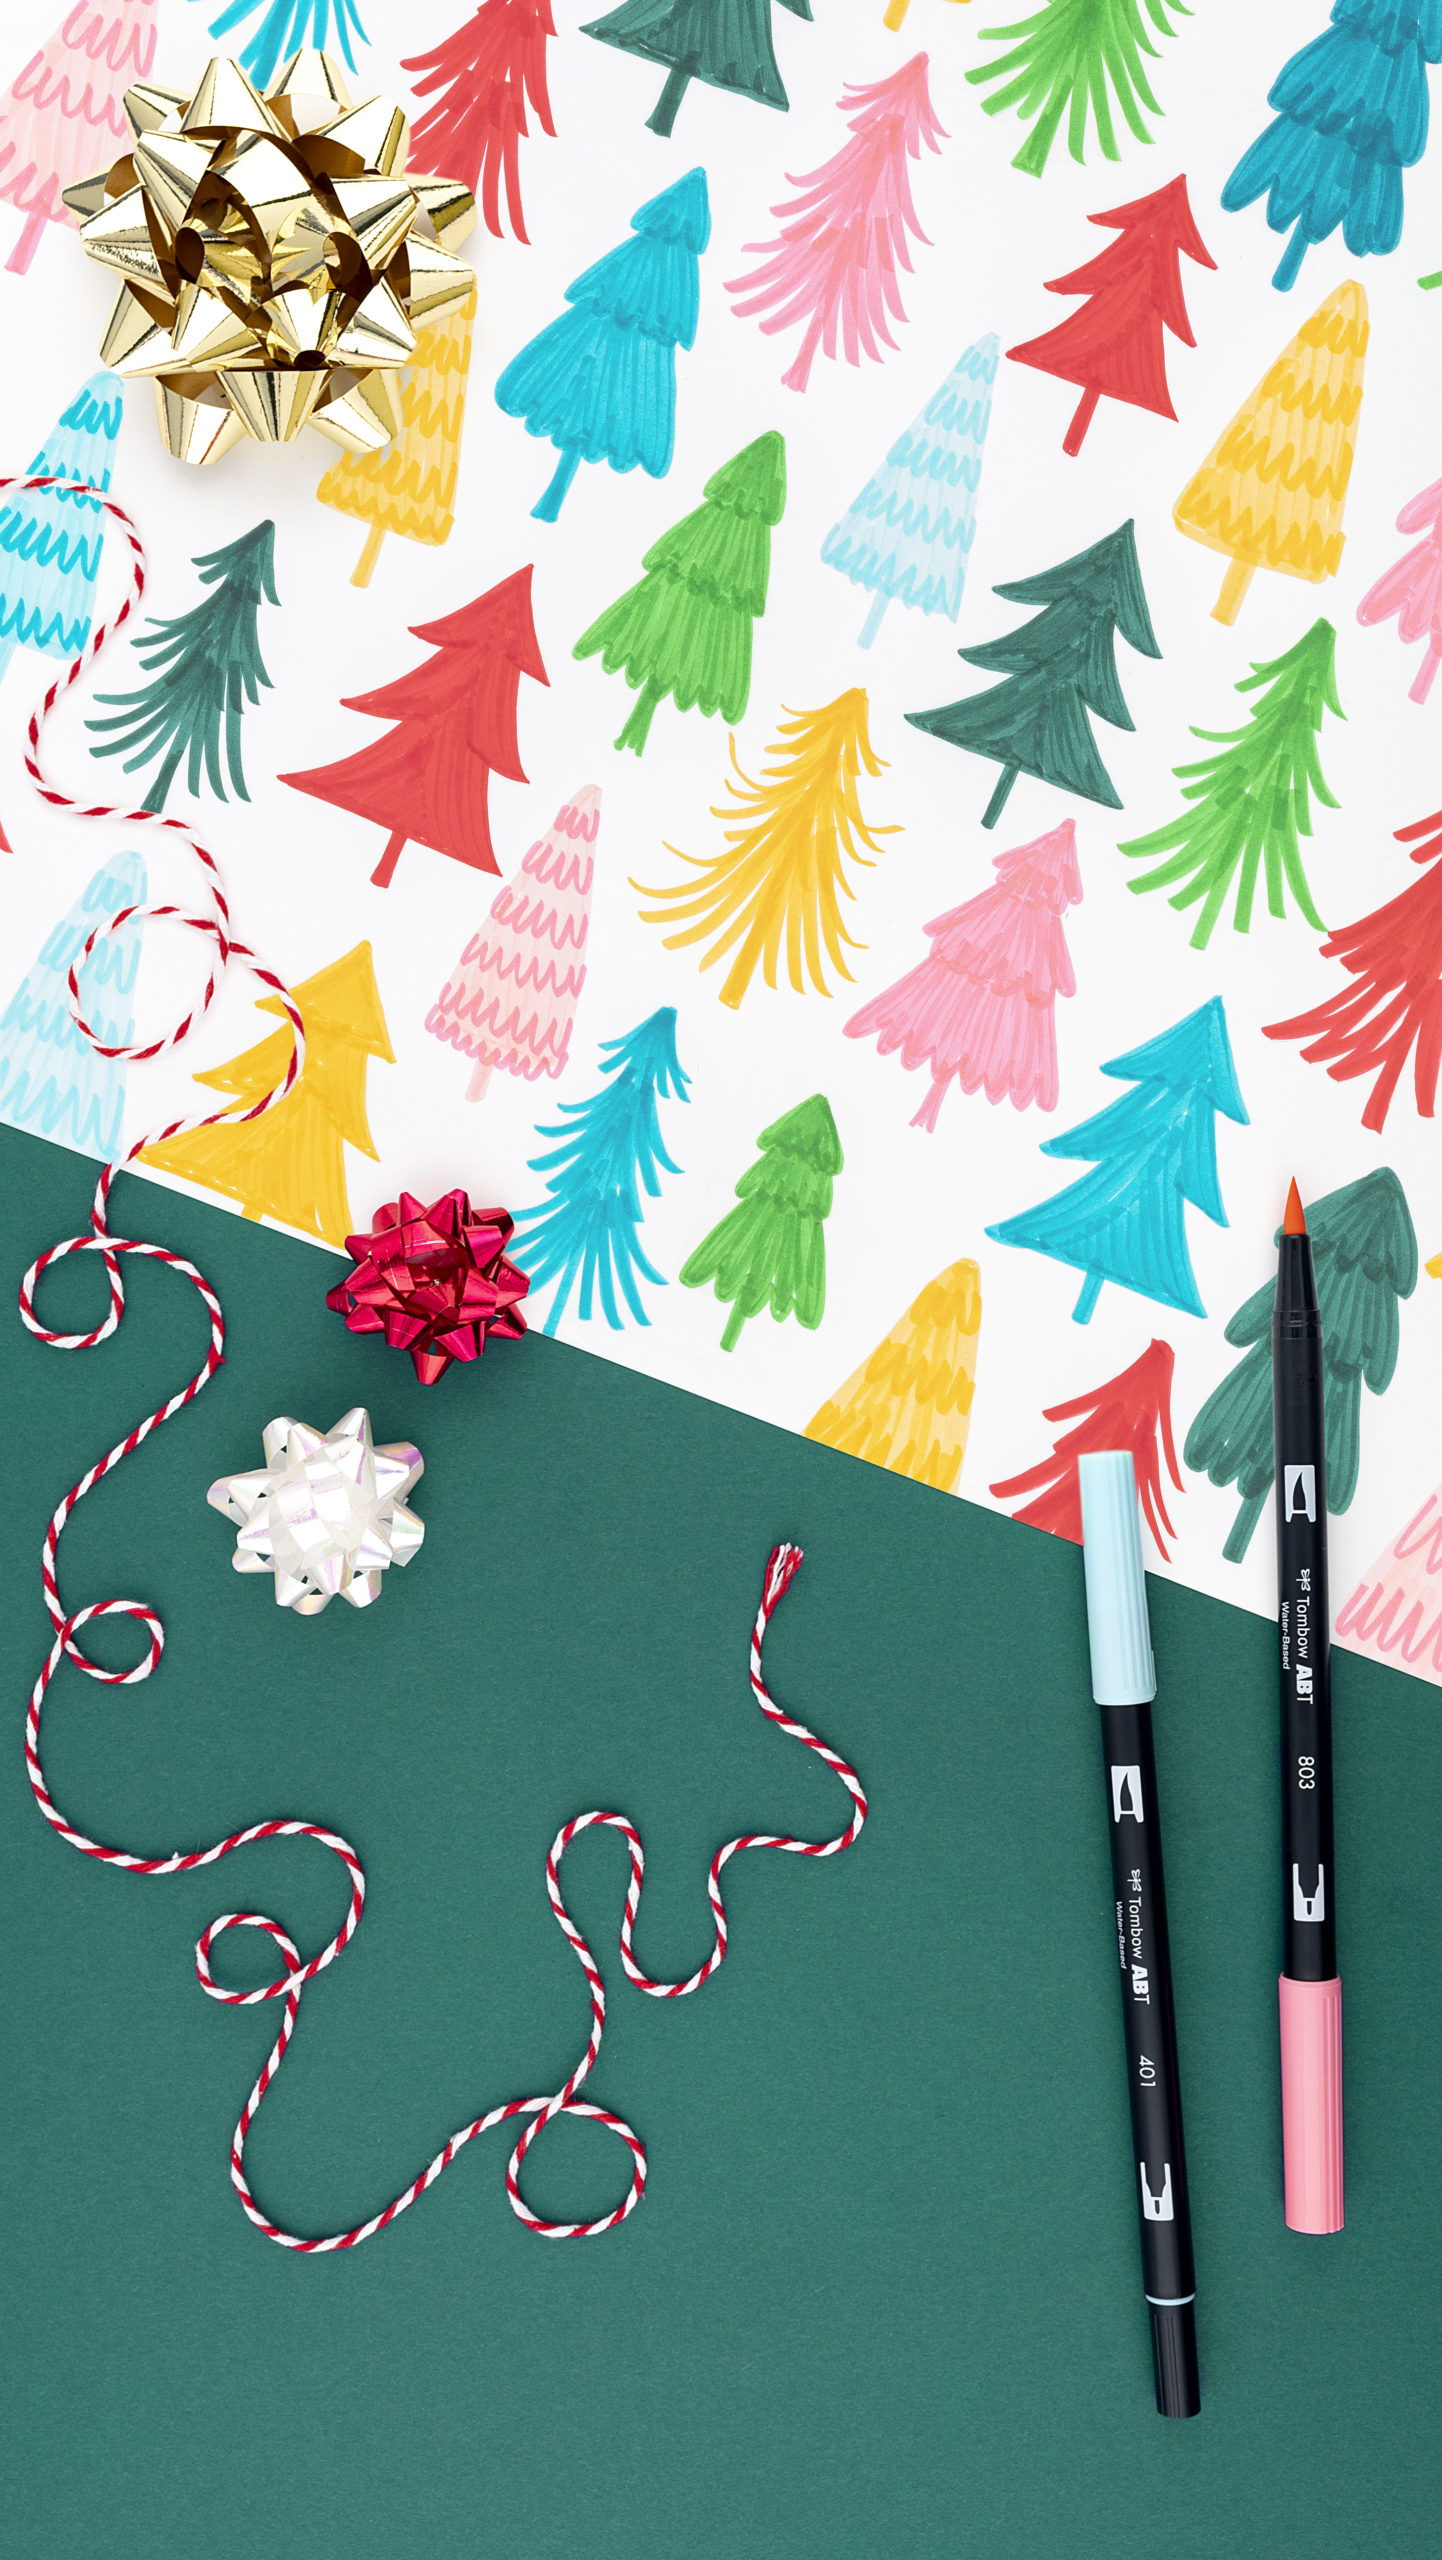 10 easy holiday craft & DIY projects with Tombow